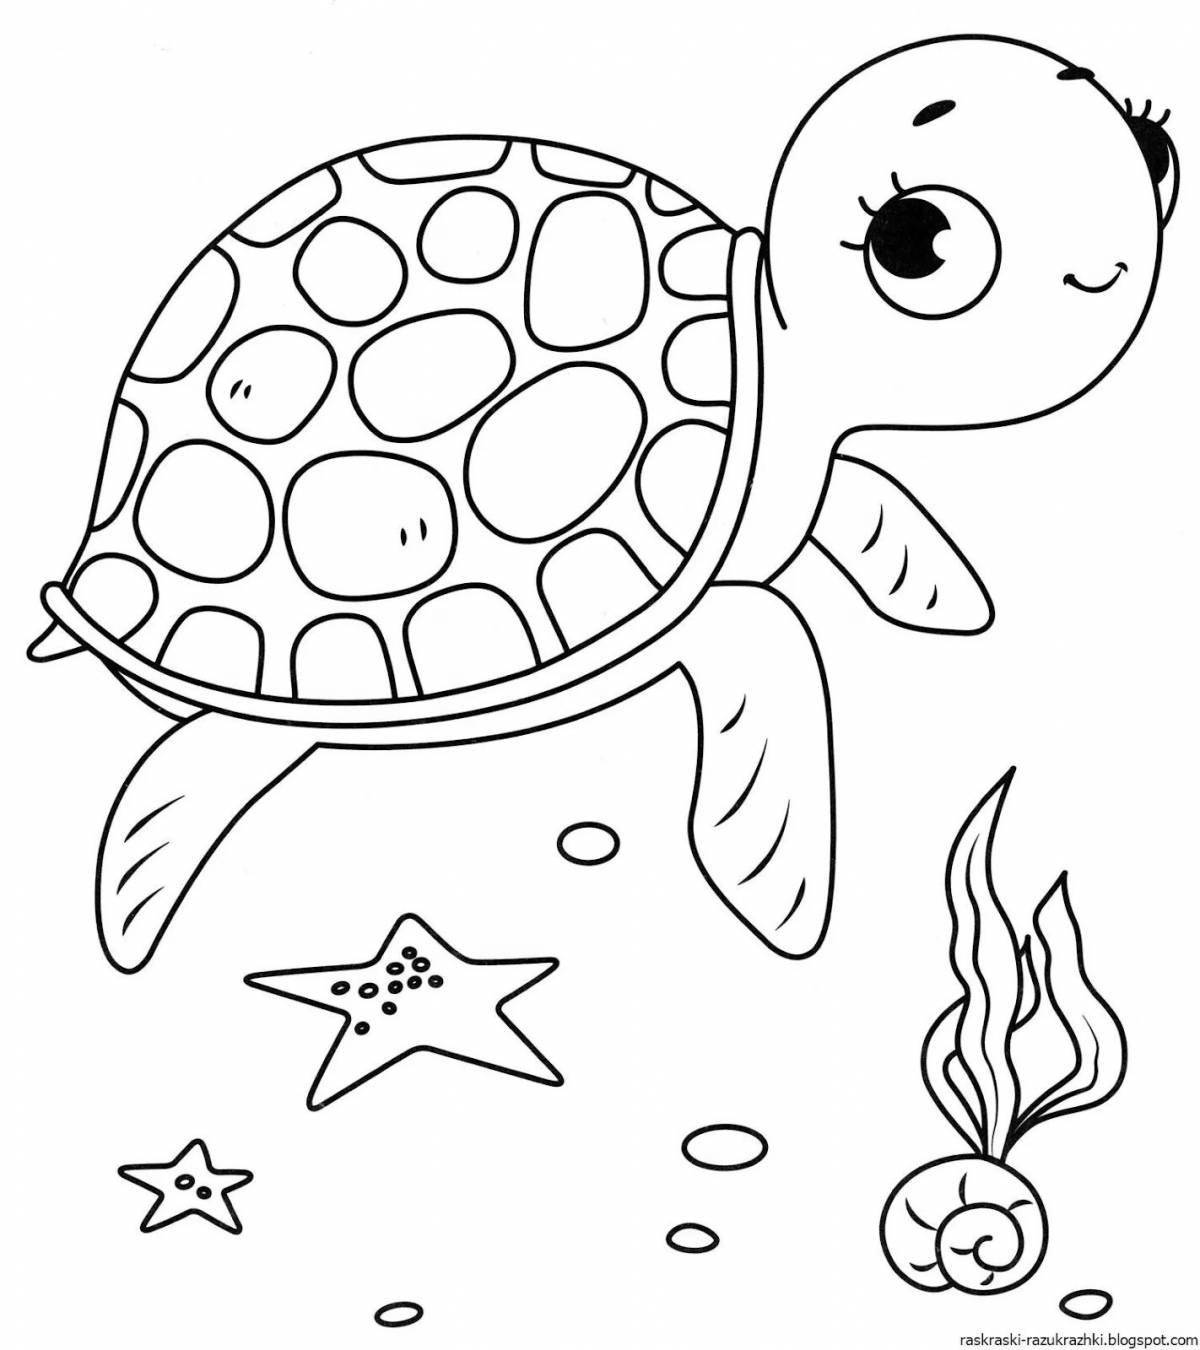 Colored sea turtle coloring pages for kids